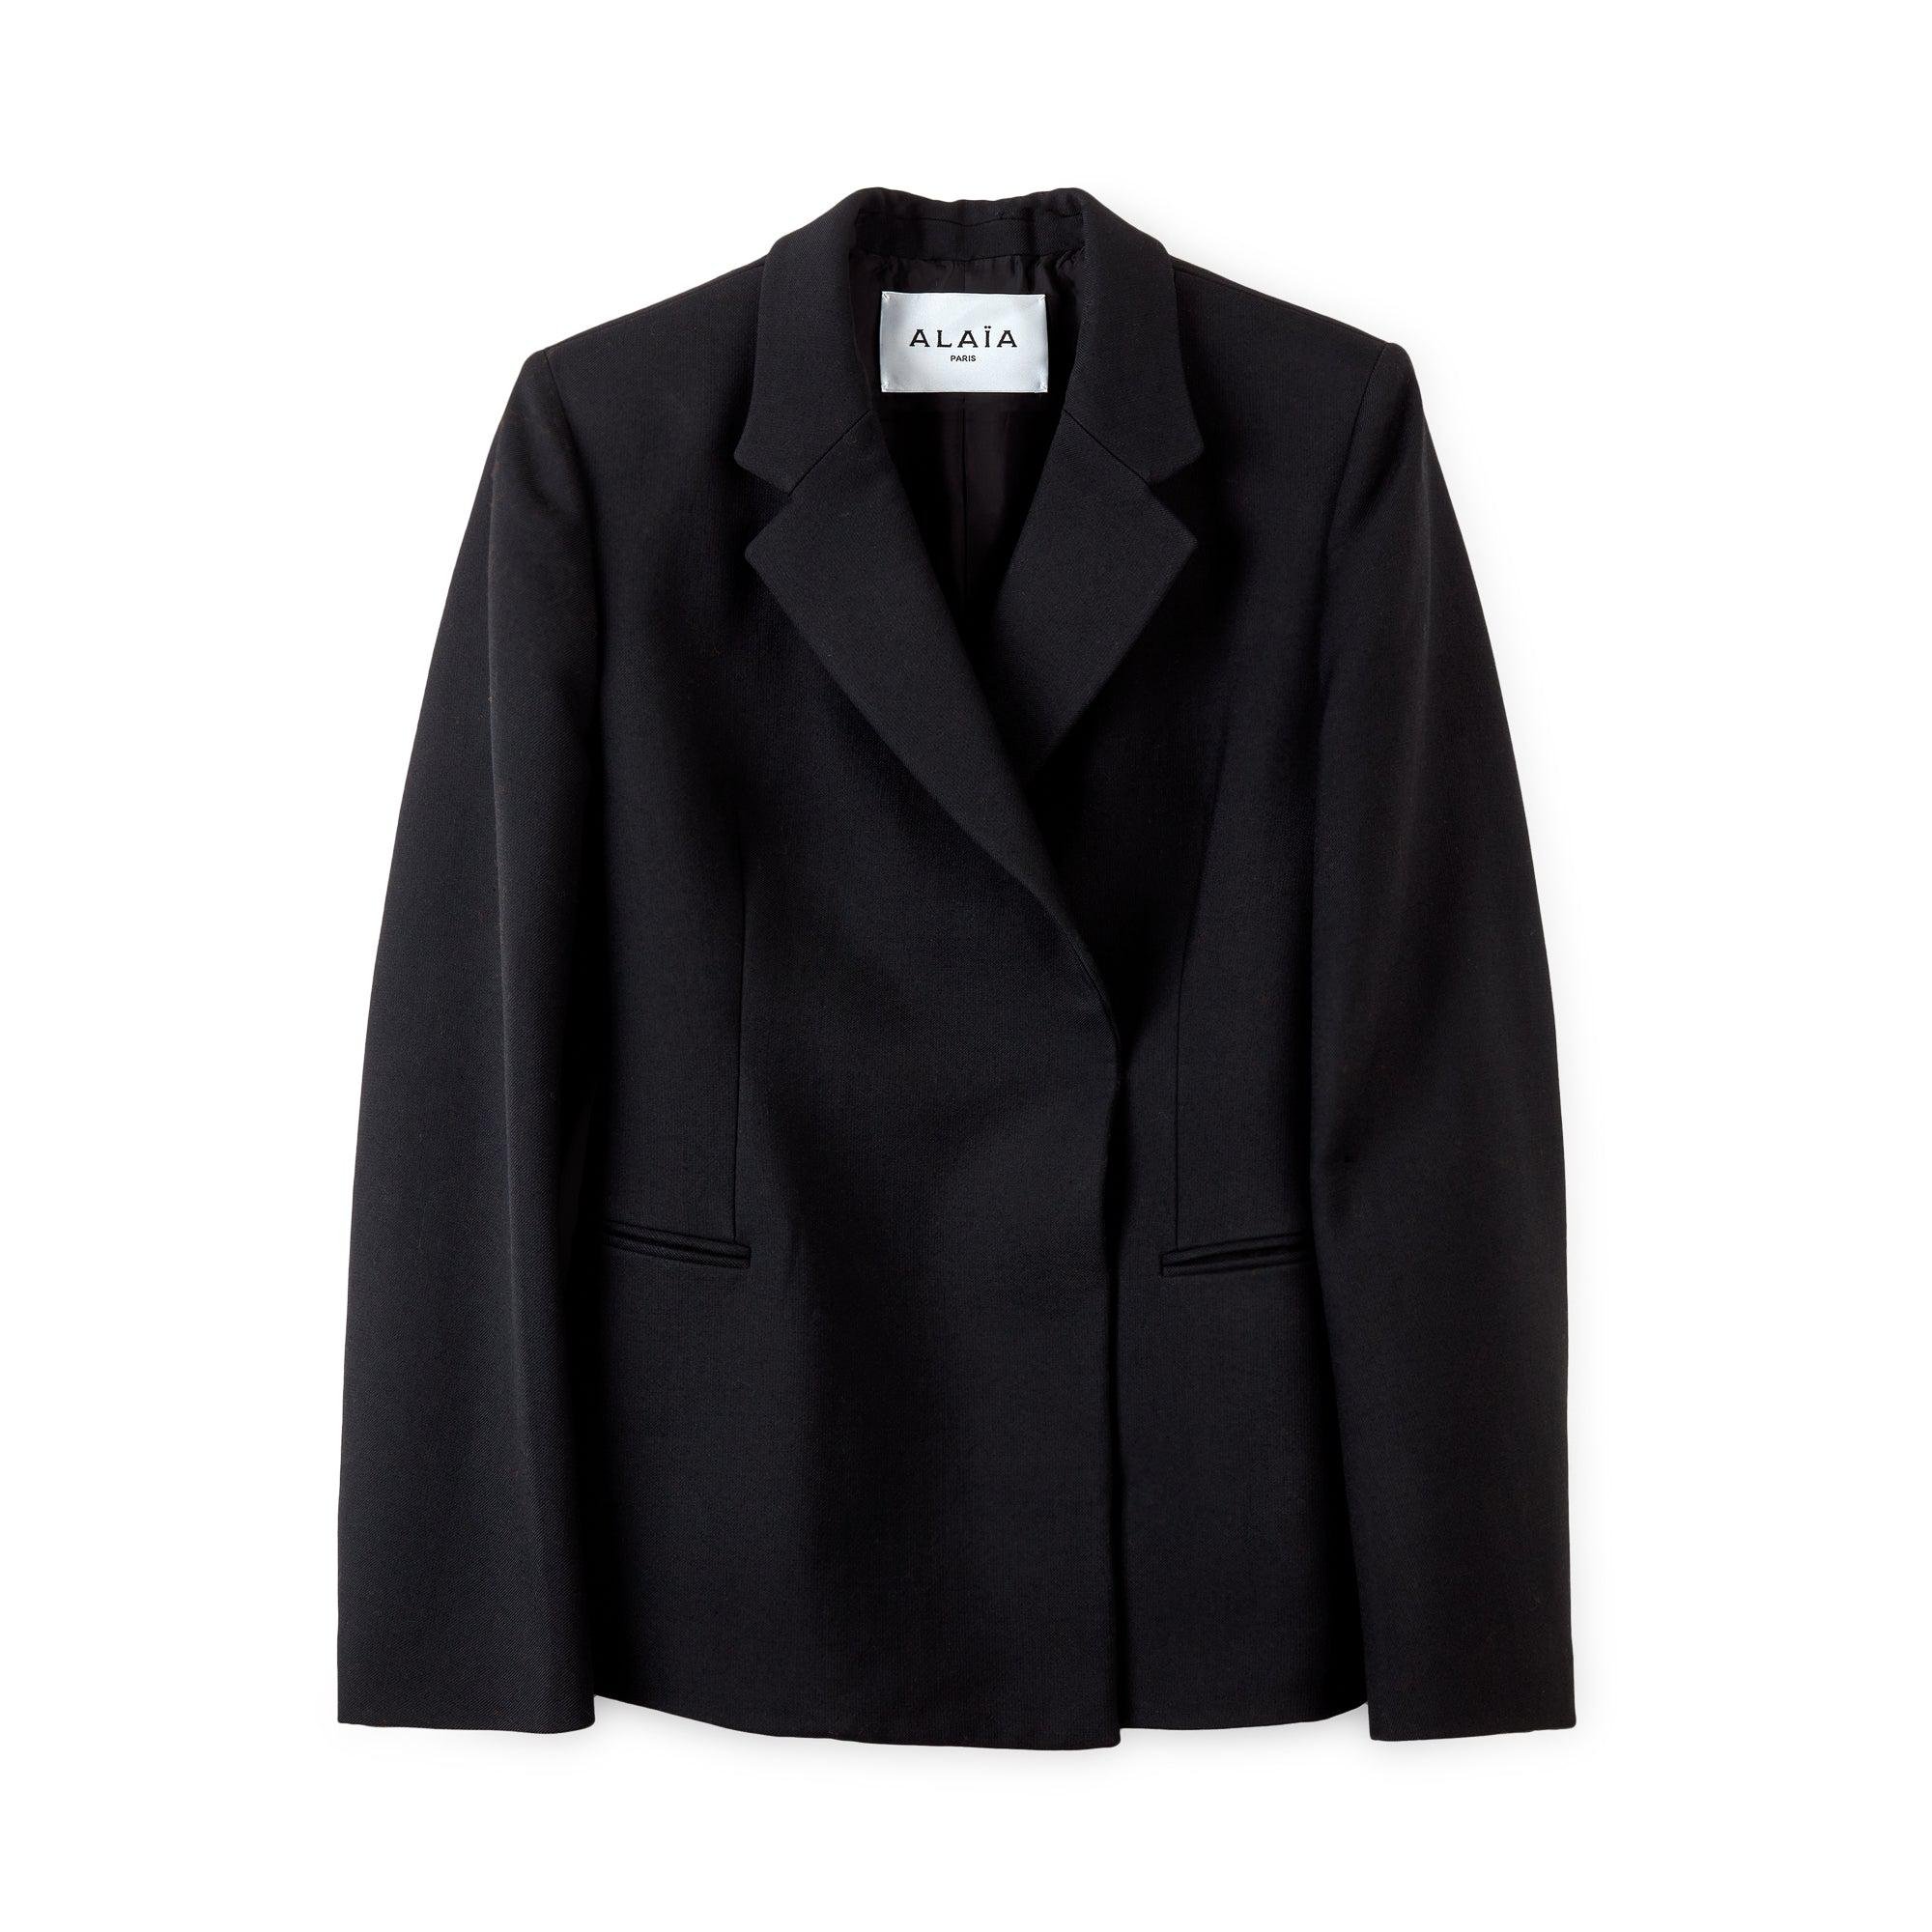 Alaïa - Women’s Veste A Fitted Tailored Jacket - (Black) by ALAIA